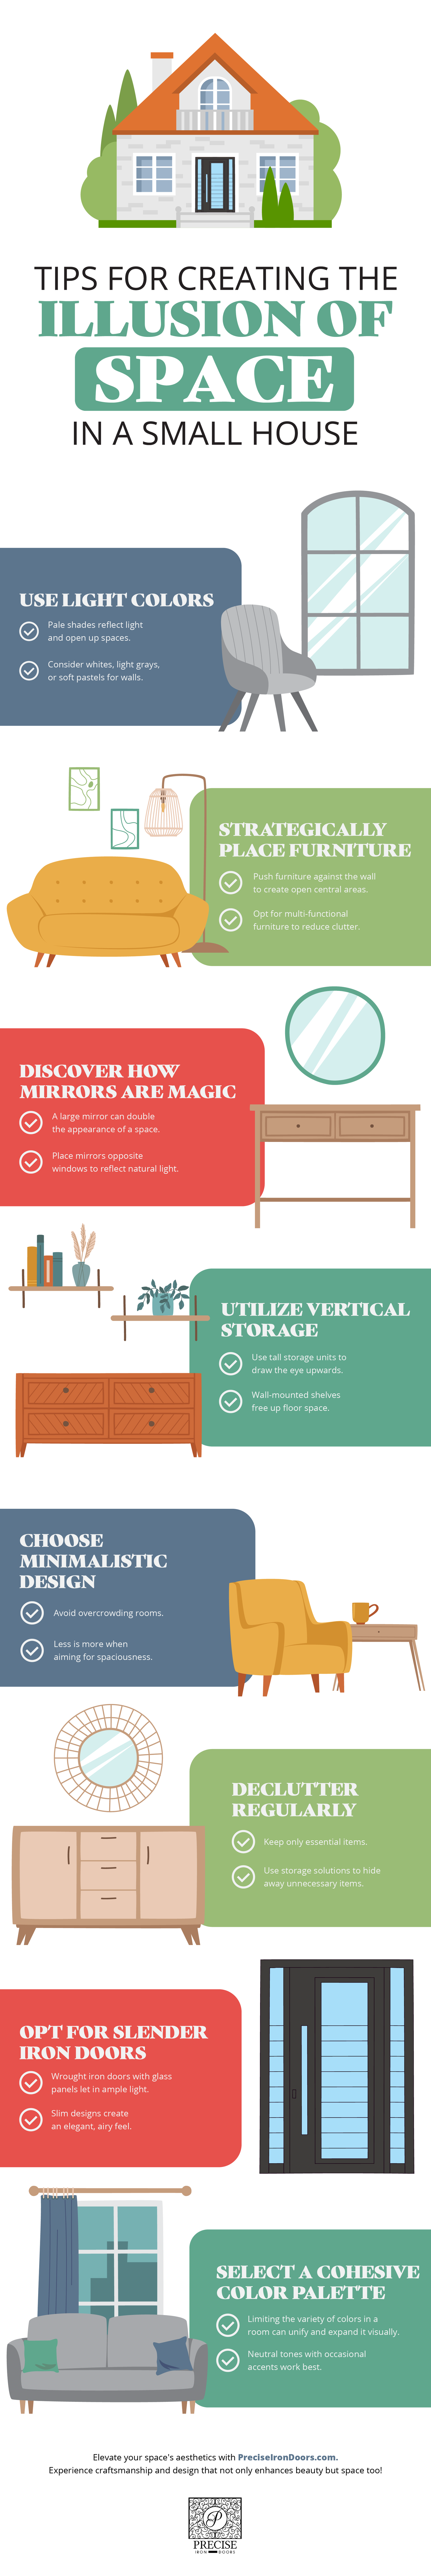 Create the Illusion of Space in a Small House Tips Infographic